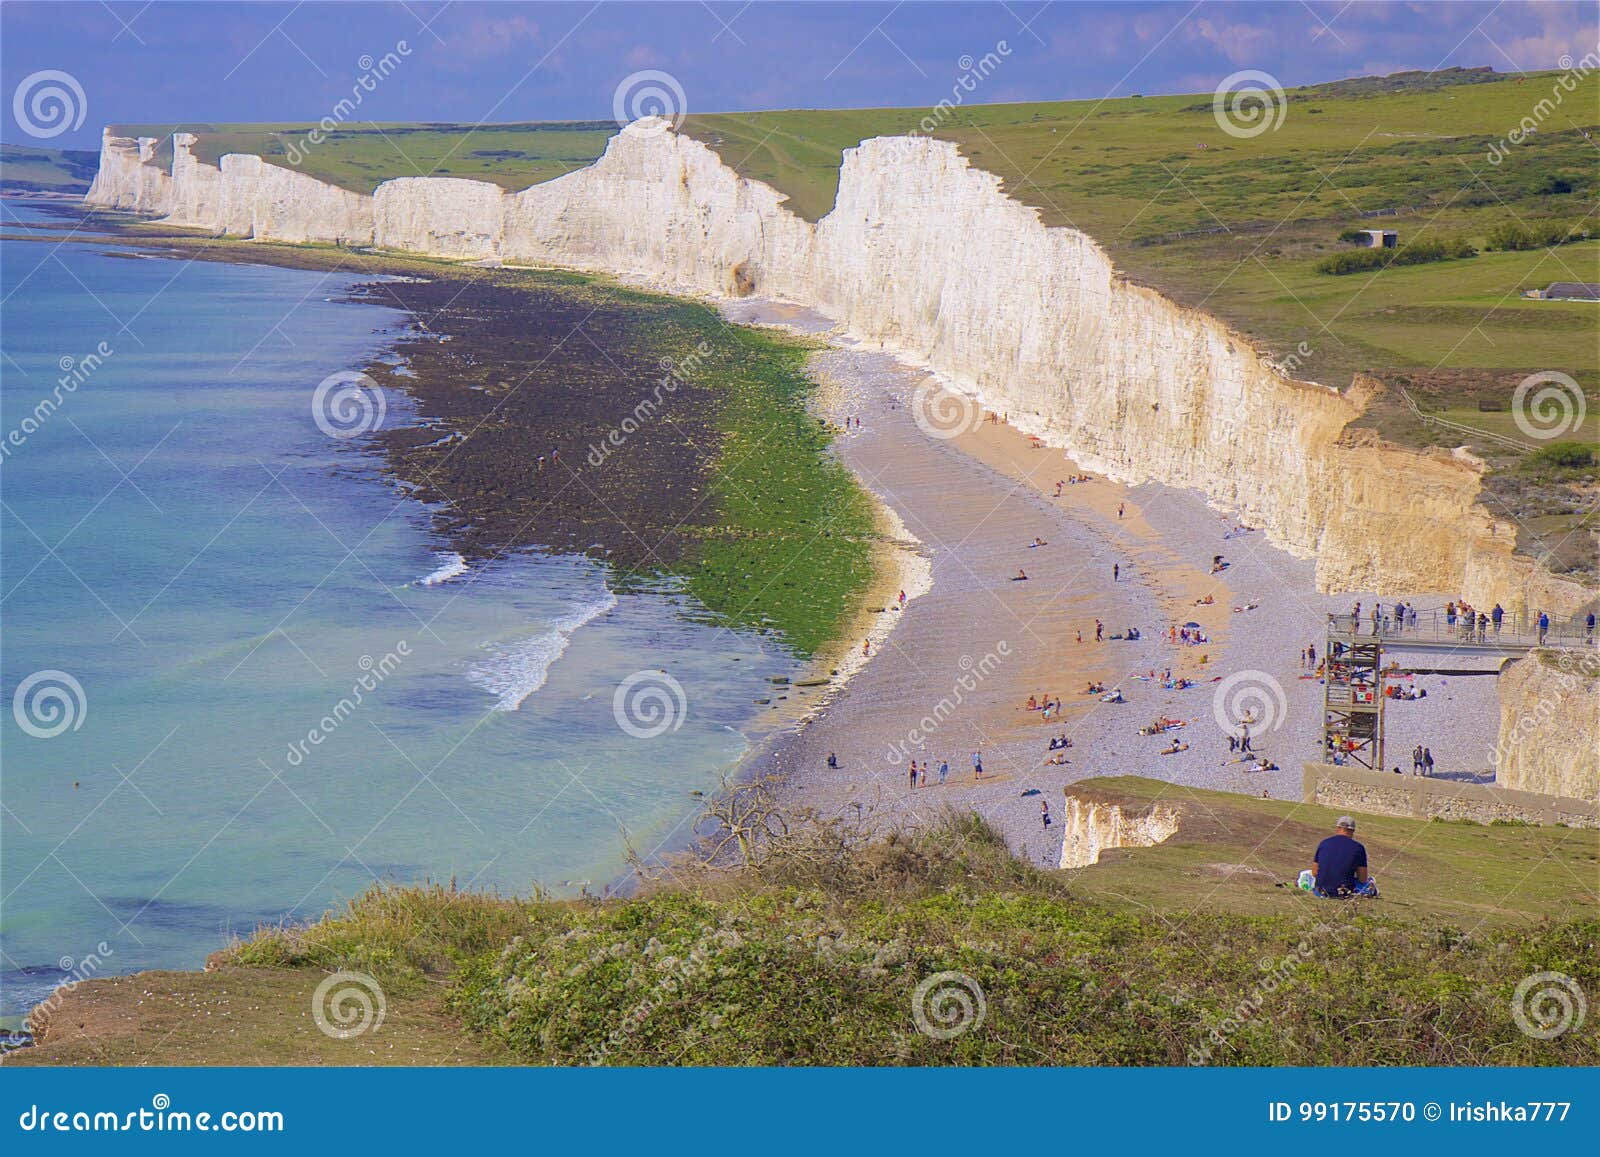 National Park Seven Sisters, UK Editorial Image - Image of cliff ...